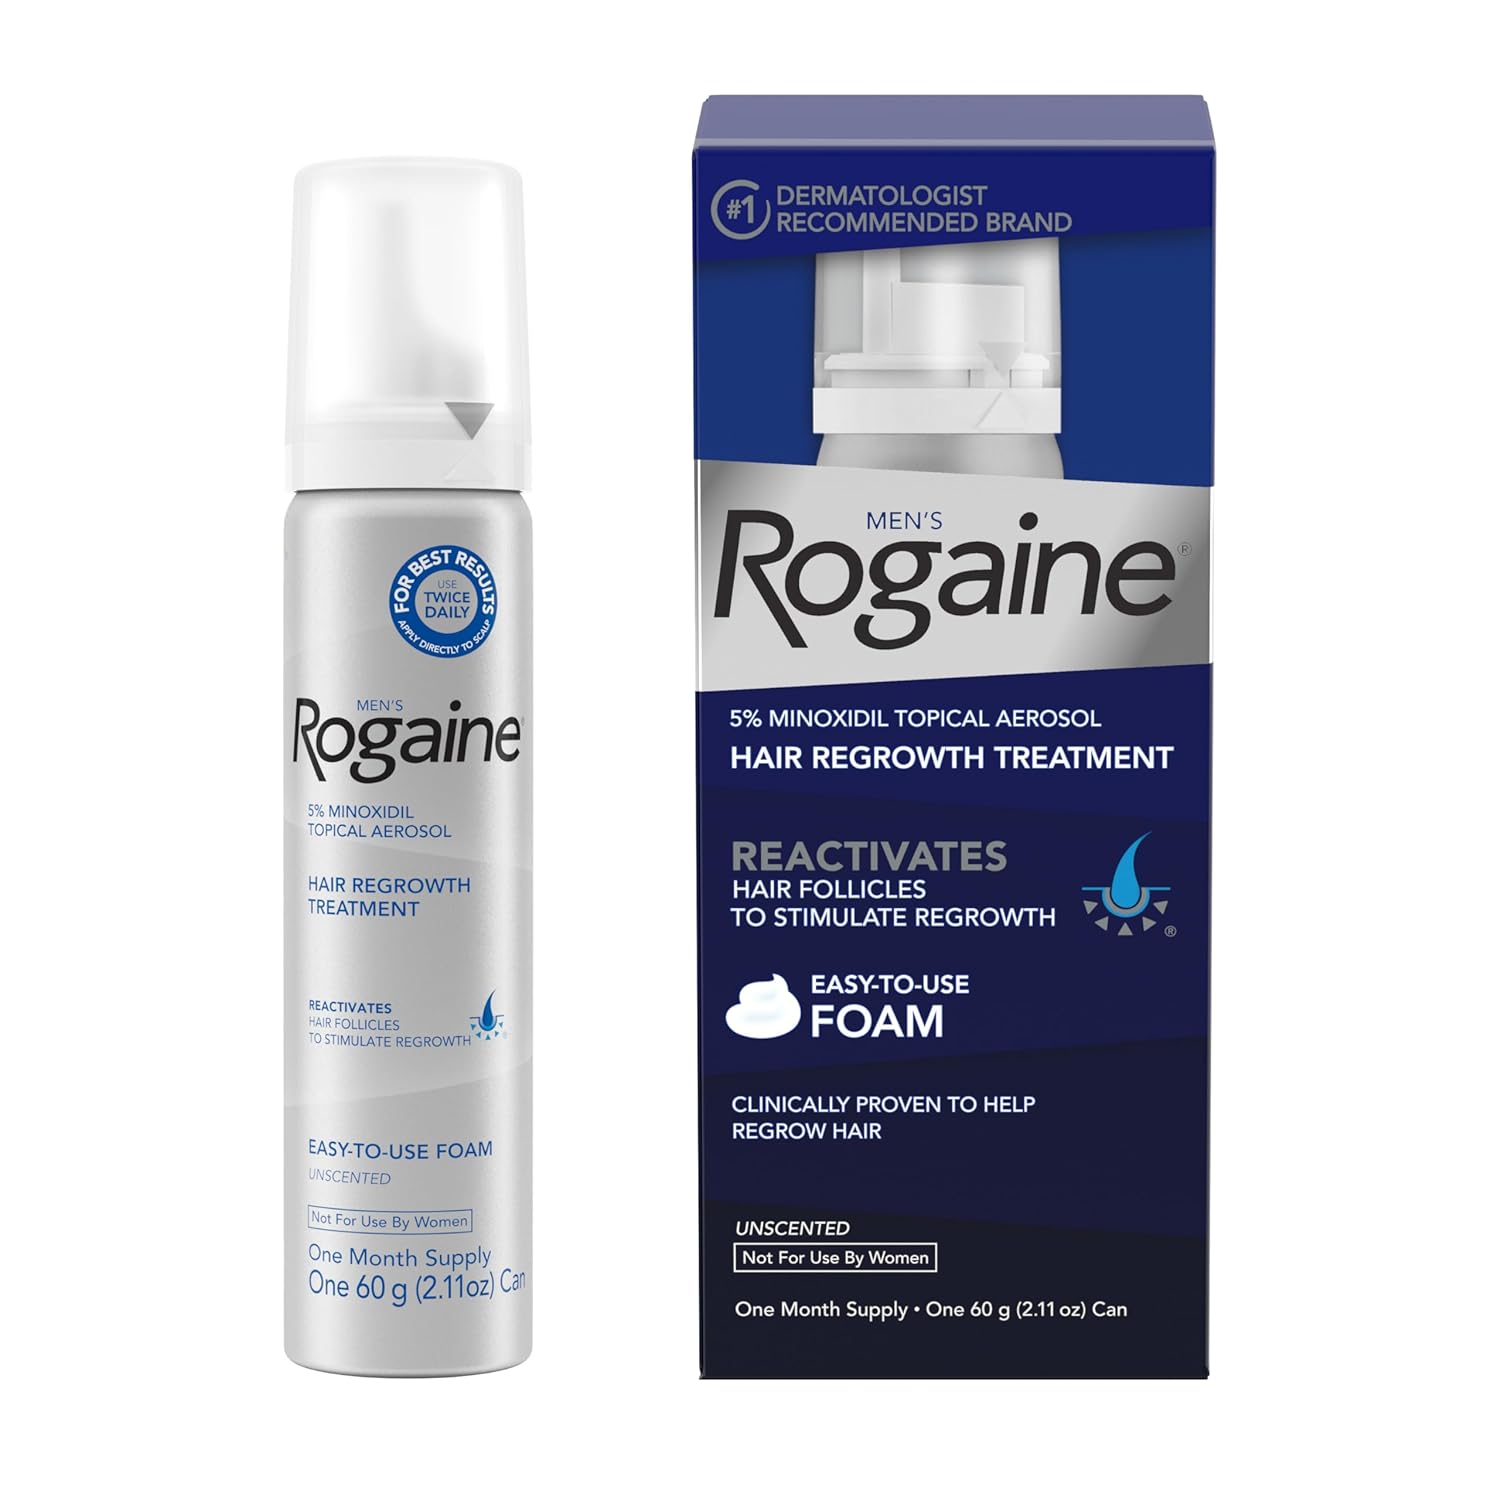 Men's Rogaine 5% Minoxidil Foam for Hair Loss and Hair Regrowth - Thinning Hair Treatment, Topical Solution - One Month Supply